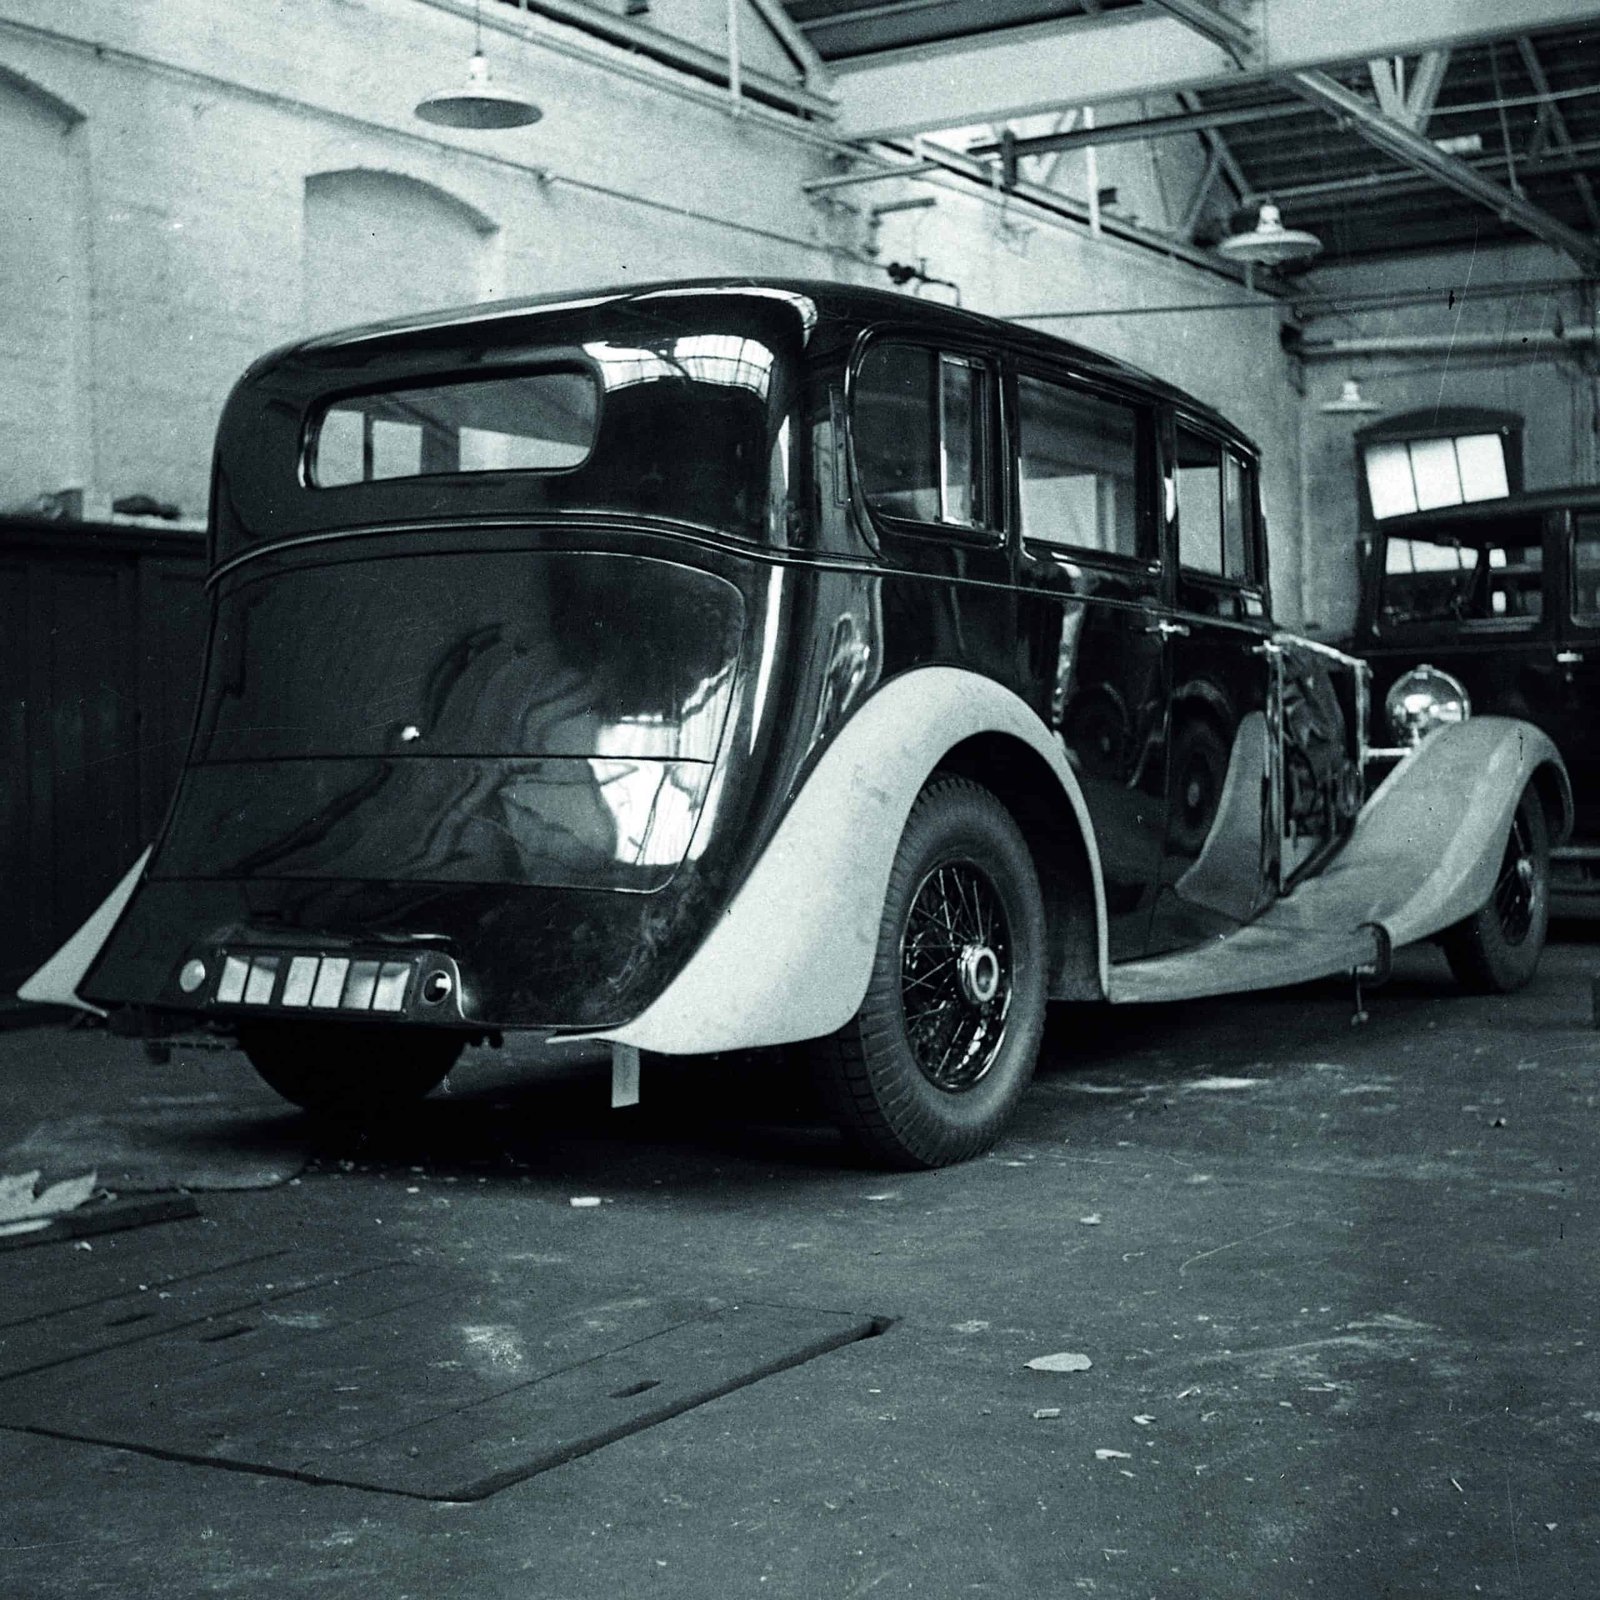 A bold black and white photo showcasing the innovation of an old car in a garage.